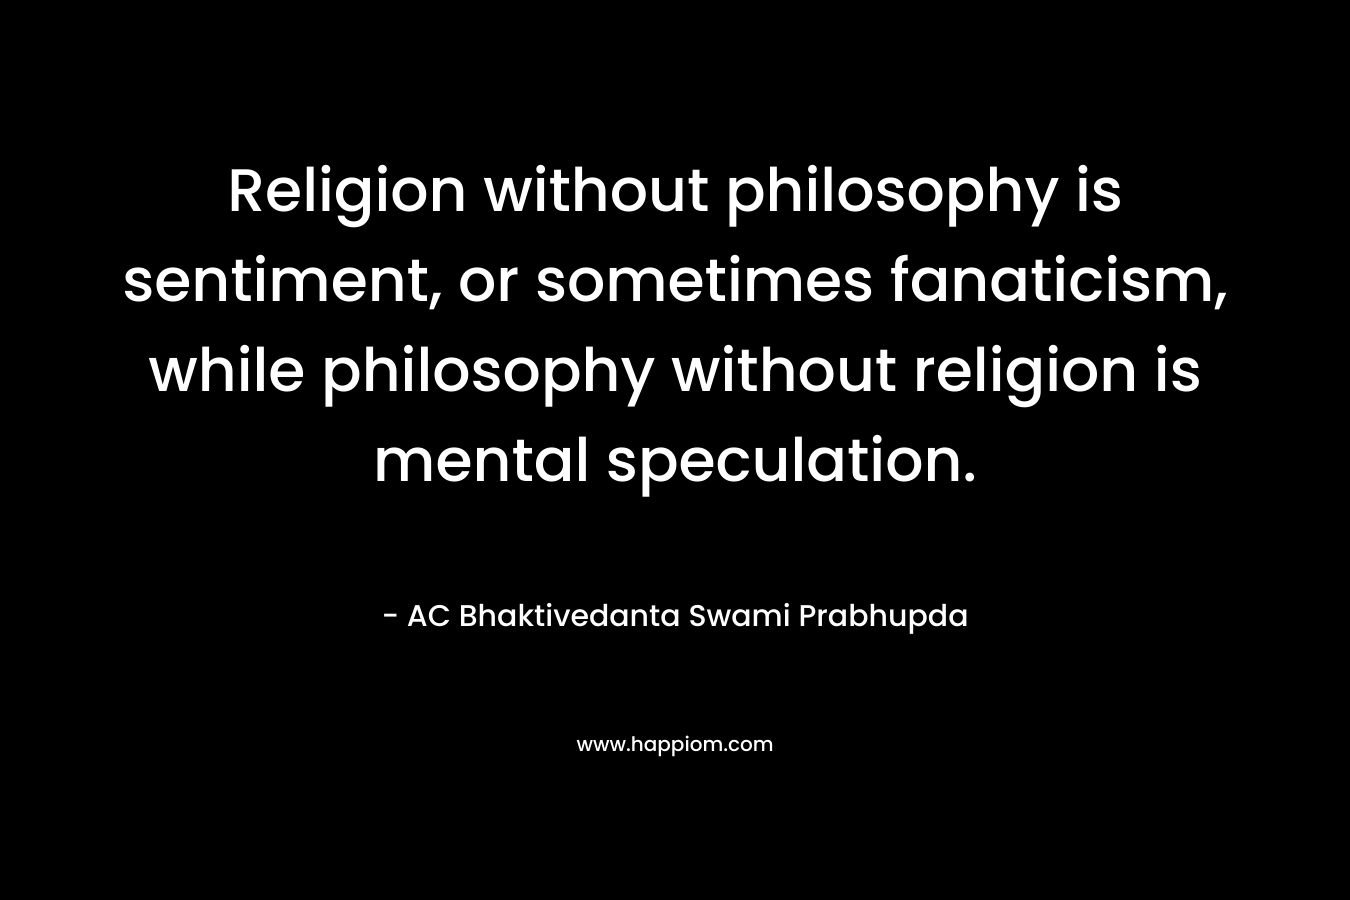 Religion without philosophy is sentiment, or sometimes fanaticism, while philosophy without religion is mental speculation.